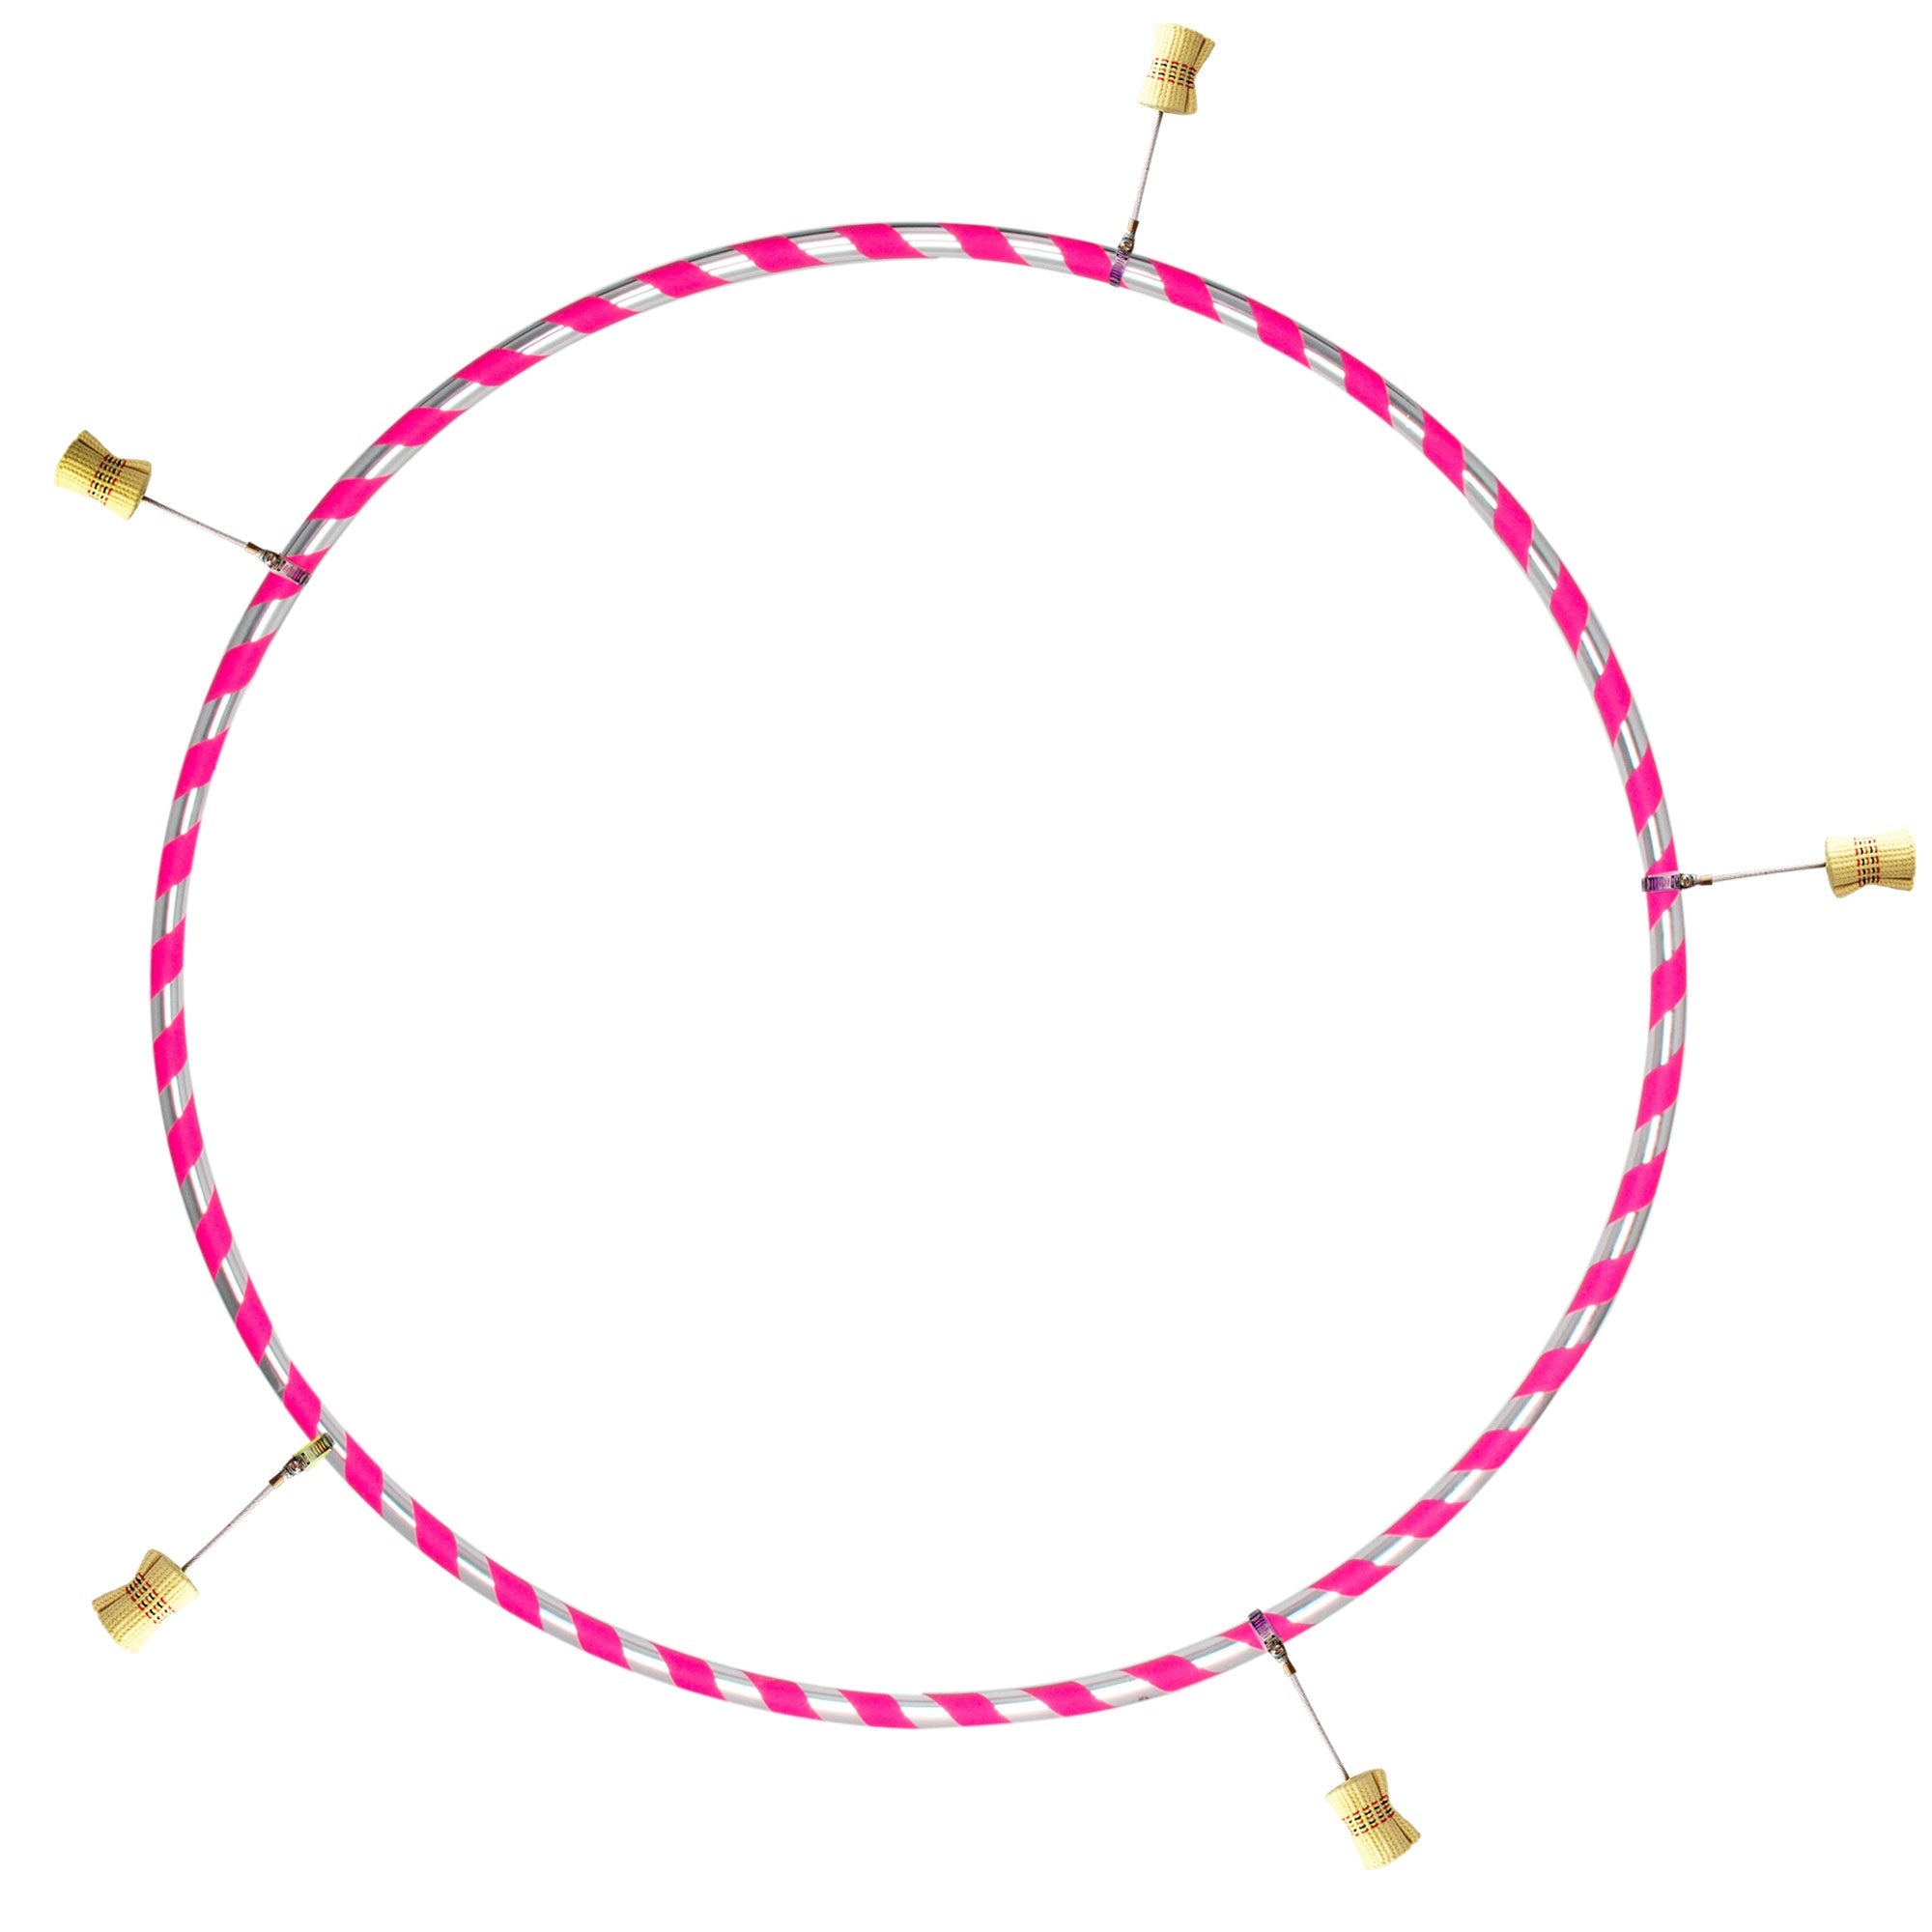 5 hot tips attached to pink hula hoop